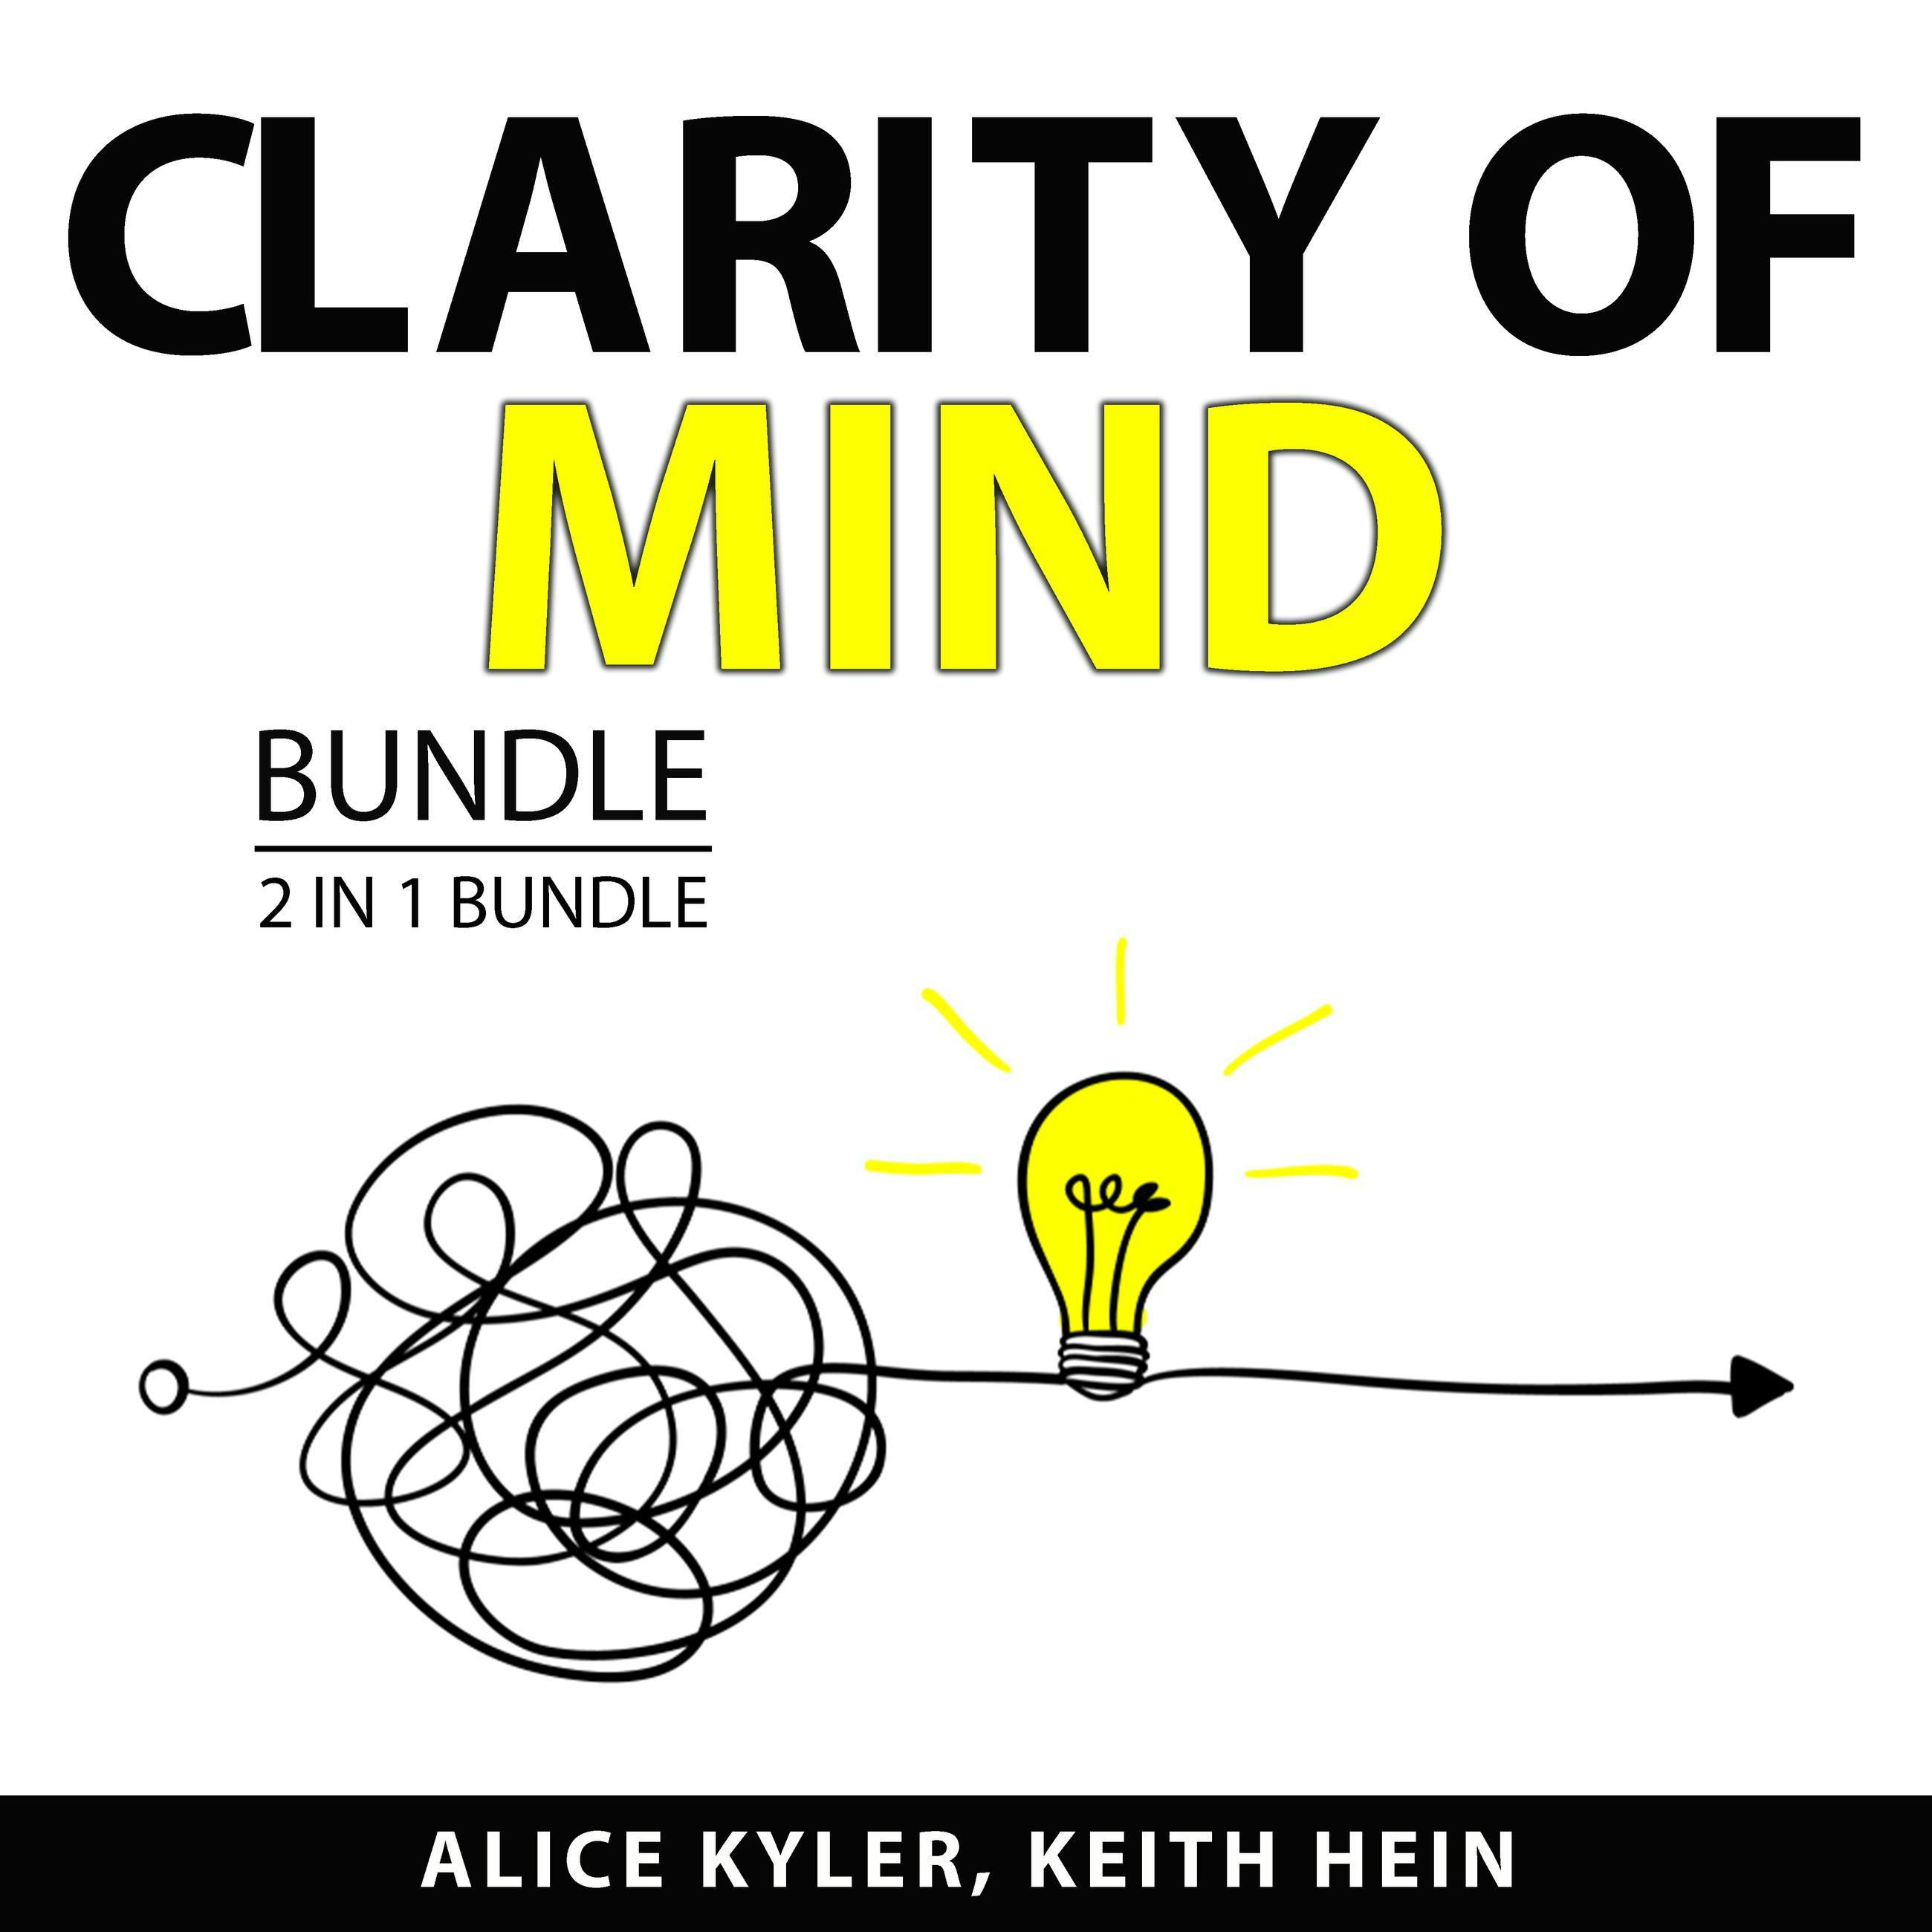 Clarity of Mind Bundle, 2 in 1 Bundle: Organized Mind, Organized Life and Declutter Your Mind - Keith Hein, Alice Kyler